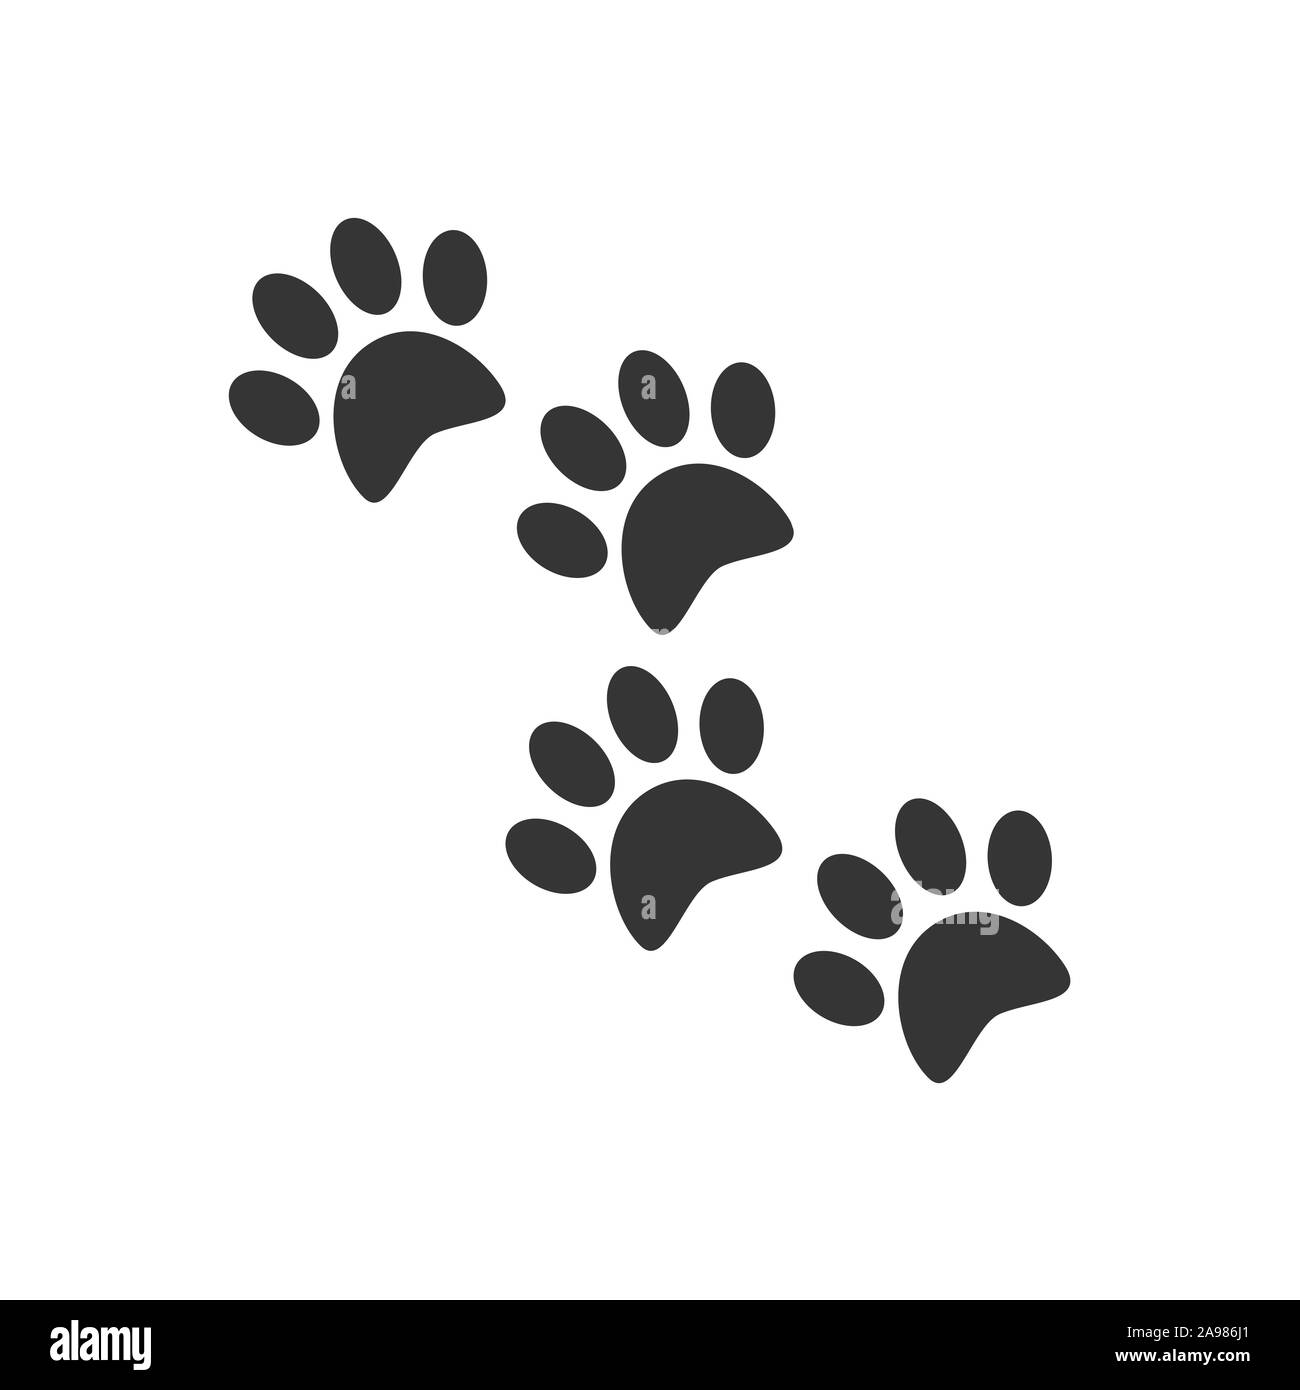 animal-footprints-vector-black-tracks-of-a-dog-or-cat-isolated-flat